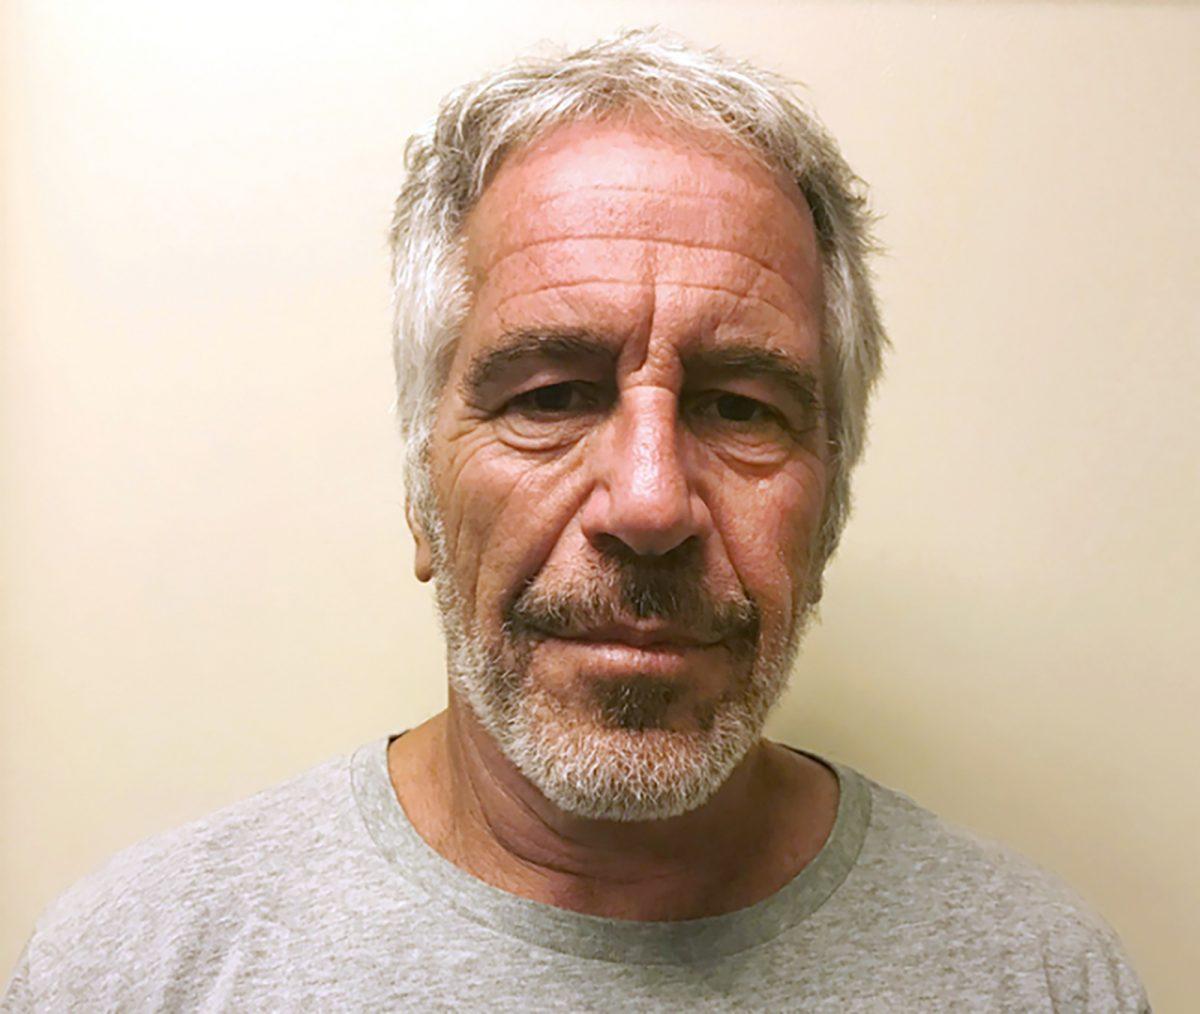 Jeffrey Epstein appears in a photograph taken for the New York State Division of Criminal Justice Services' sex offender registry March 28, 2017 and obtained by Reuters July 10, 2019. (New York State Division of Criminal Justice Services/Handout via Reuters)